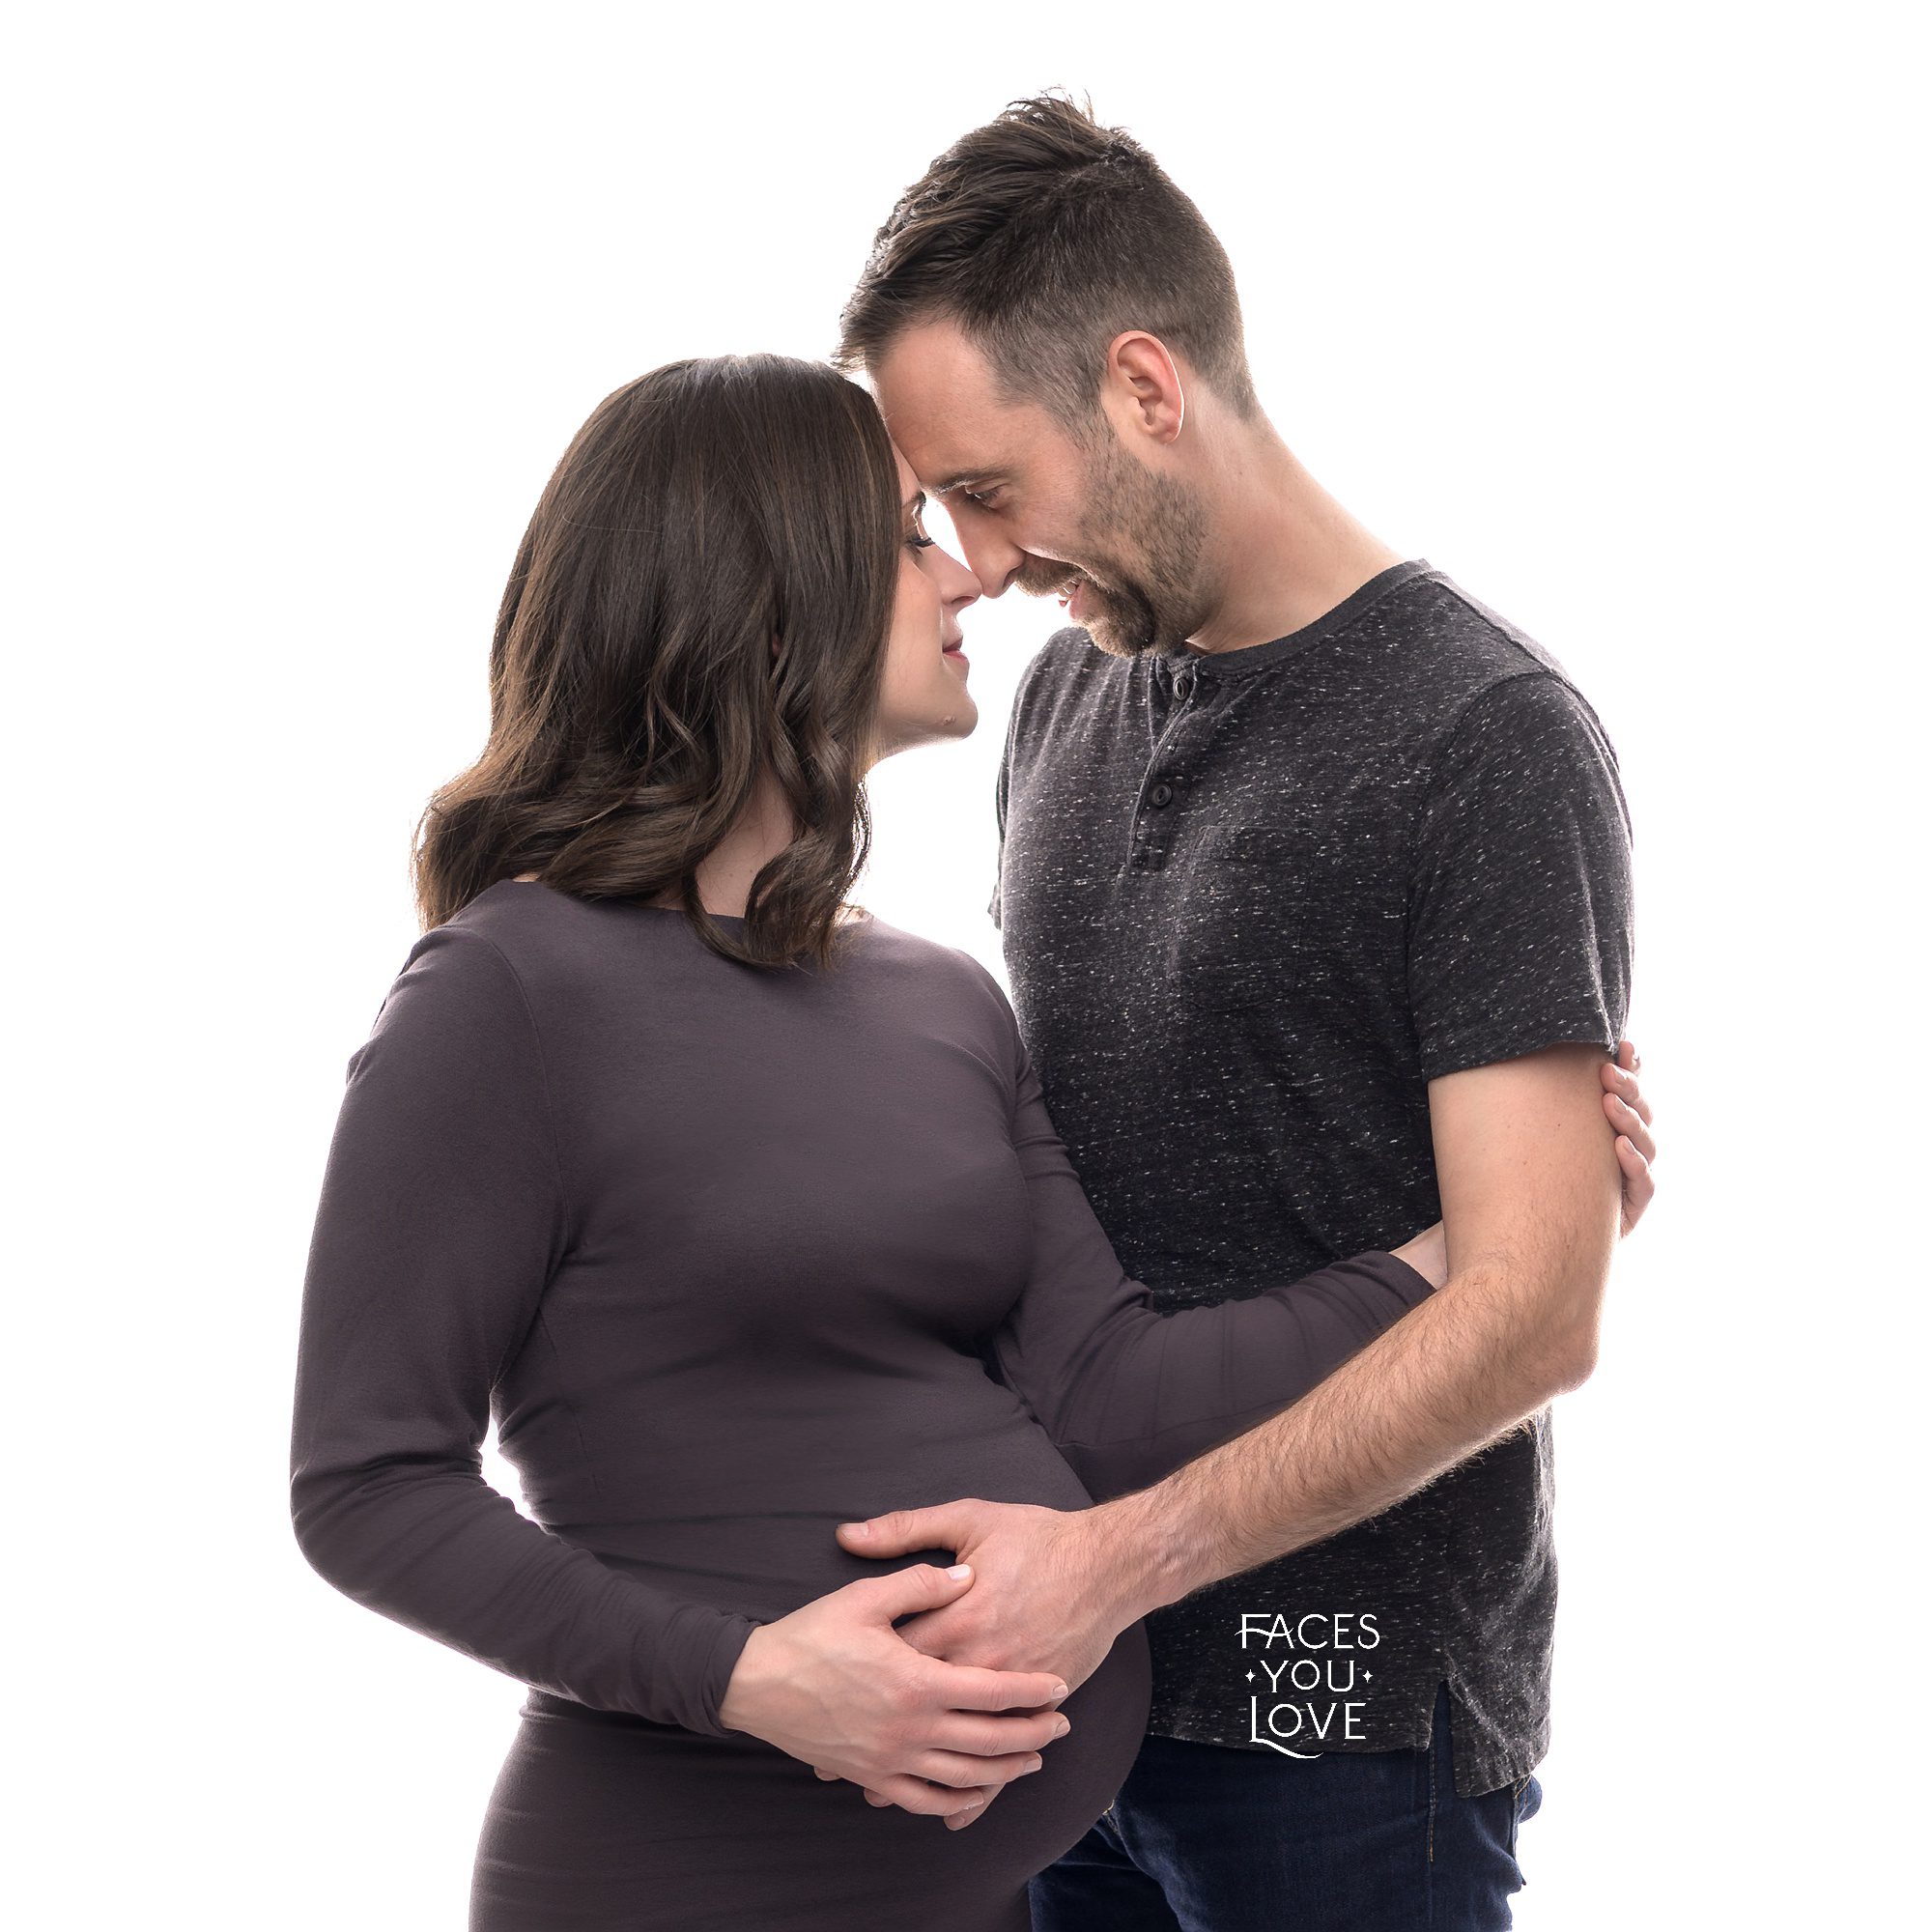 Studio maternity portrait of a couple. They are facing each other, foreheads and noses touching, and their arms are entwined around mom's belly. Photographed on a high-key white background, with both of them wearing dark gray. Photo made at the Faces You Love Photography studio in Overland Park.